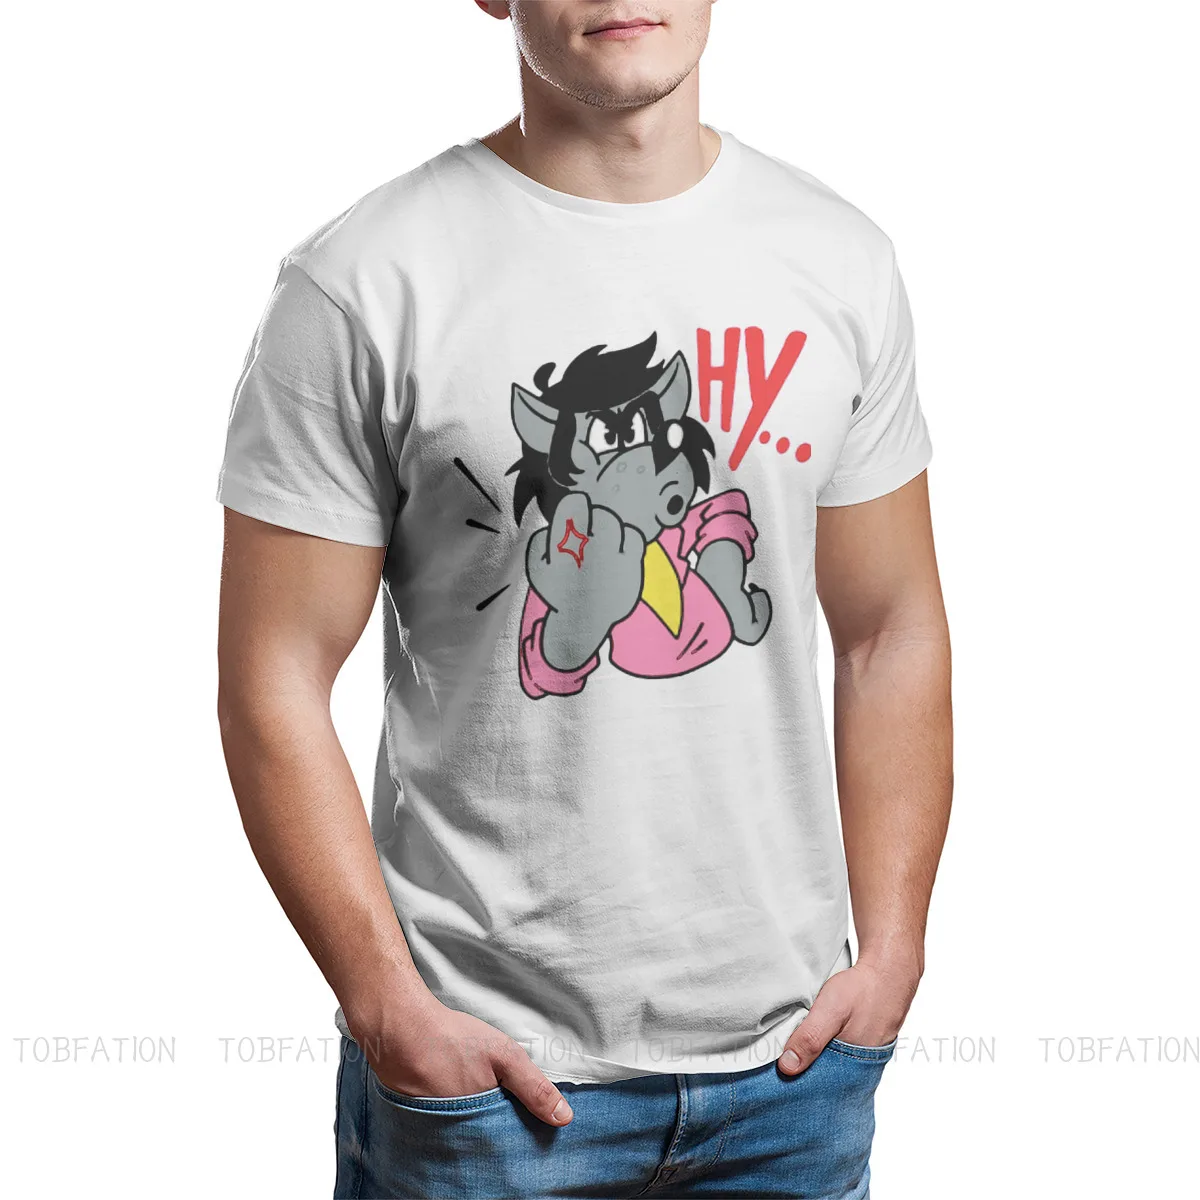 

Nervous Angry Hy Hip Hop TShirt Nu Pogodi Well Just You Wait Wolf Hare Cartoon Creative Tops T Shirt Men Tee Unique Gift Clothes